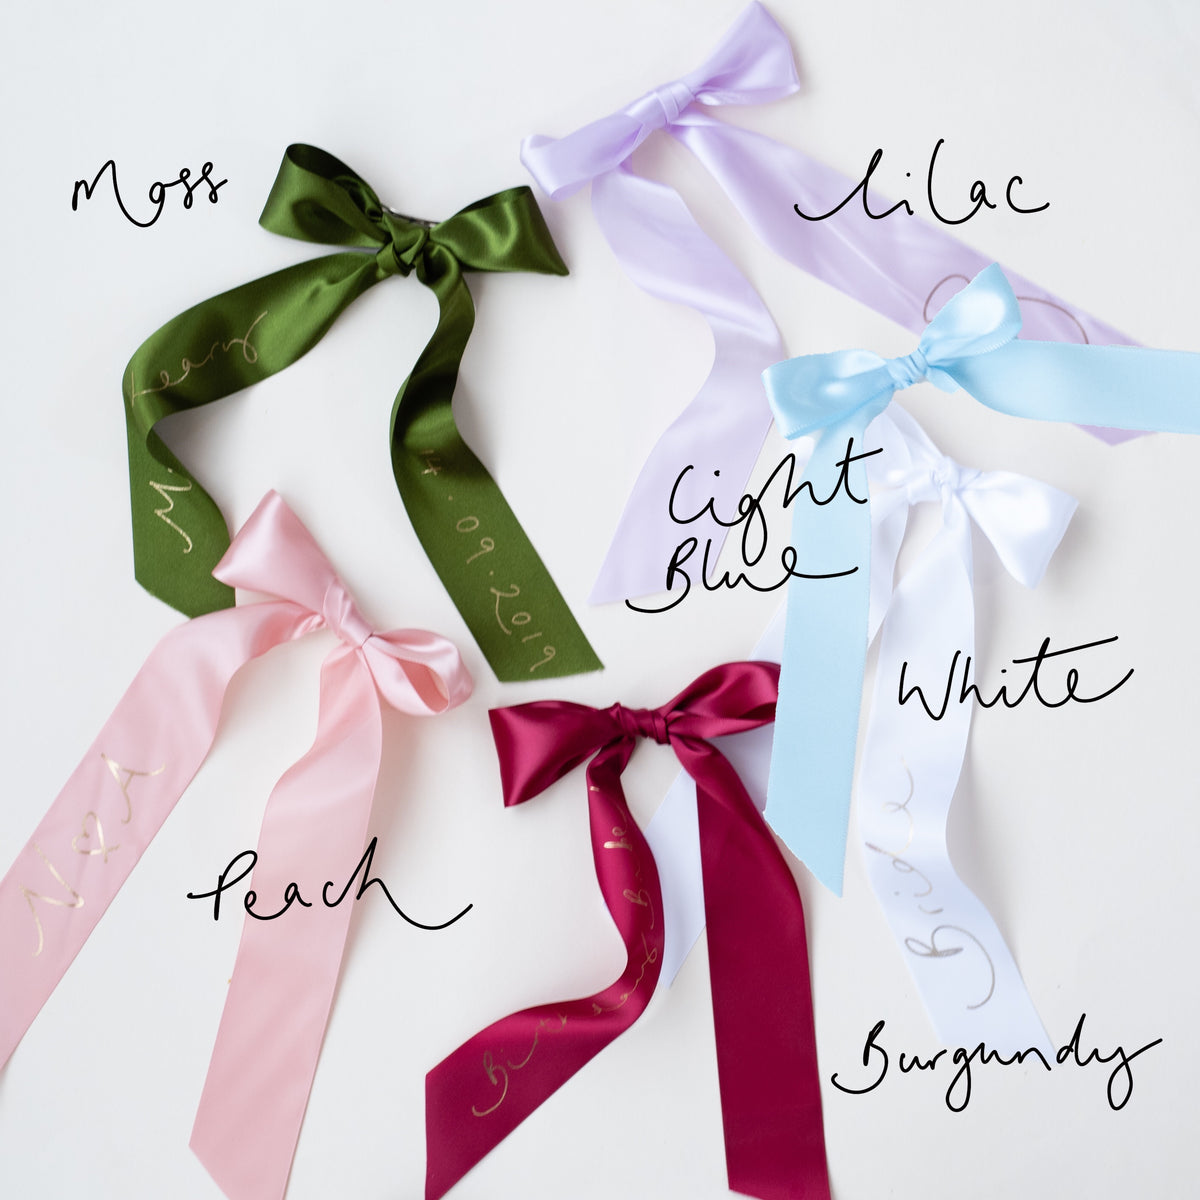 Personalised Wedding Ribbon - Narrow Width for Bridesmaid Bouquets etc